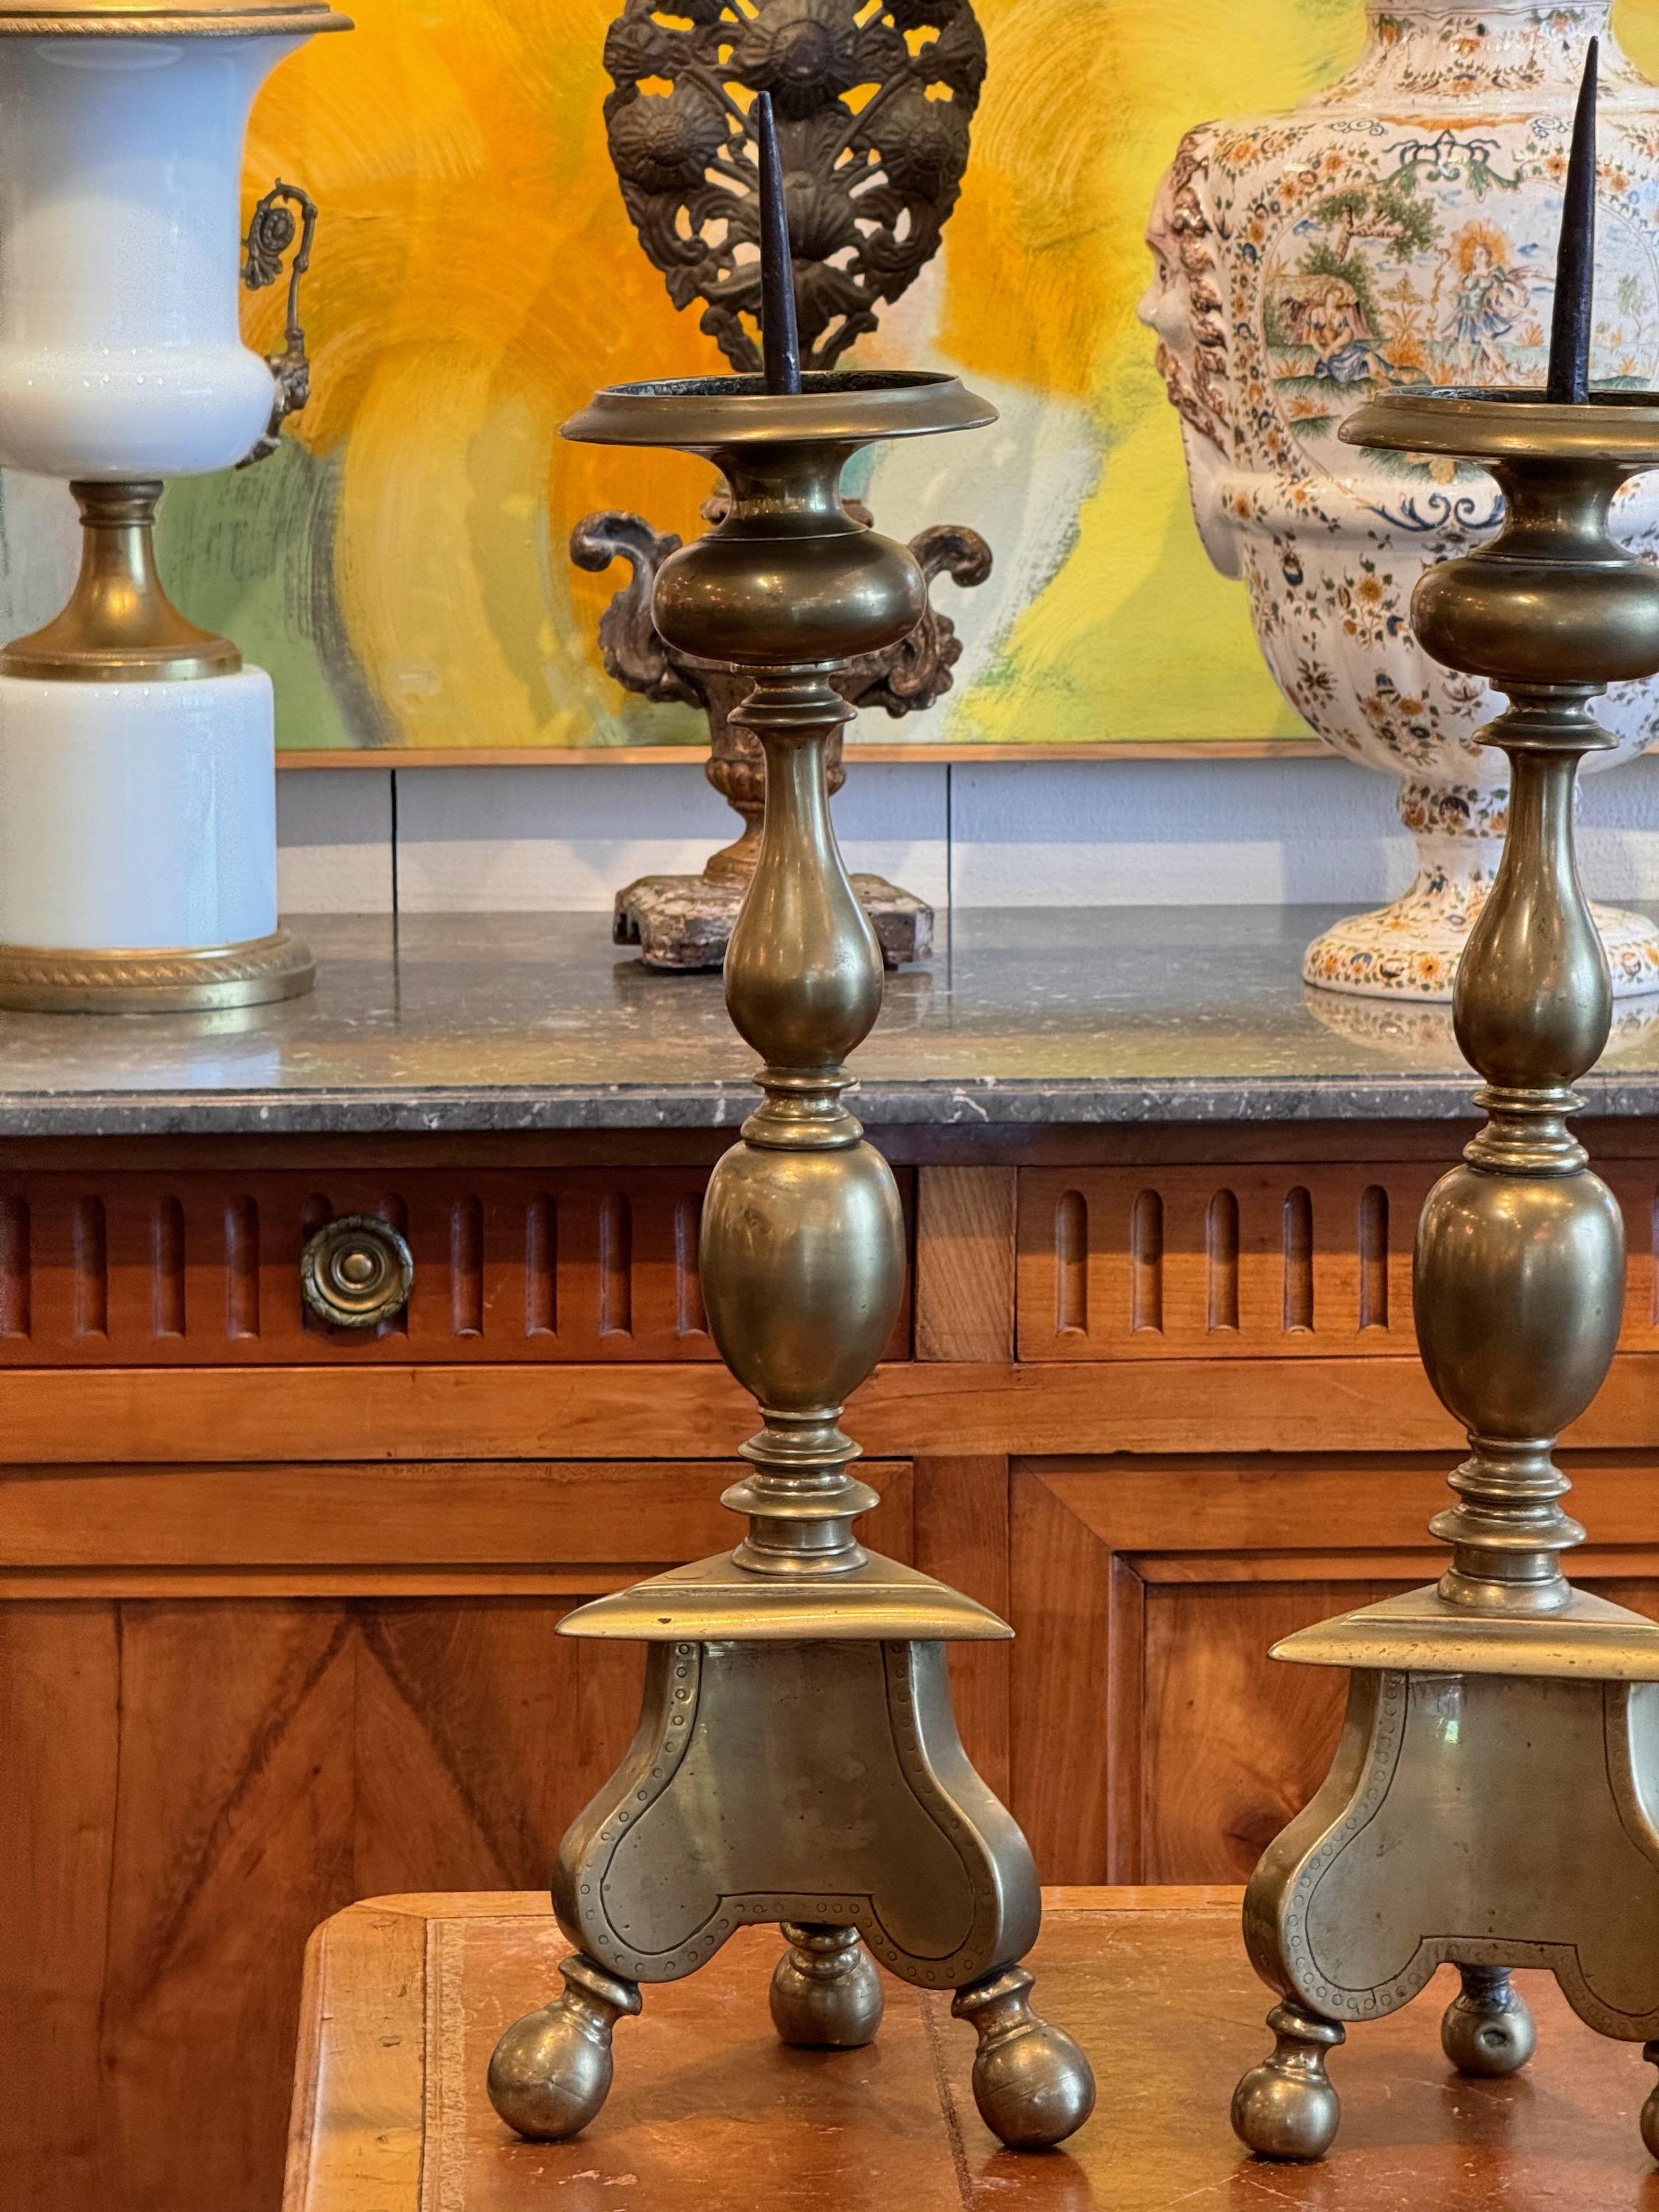 An early pair of heavy brass candlesticks. These are rare and will brighten any room.